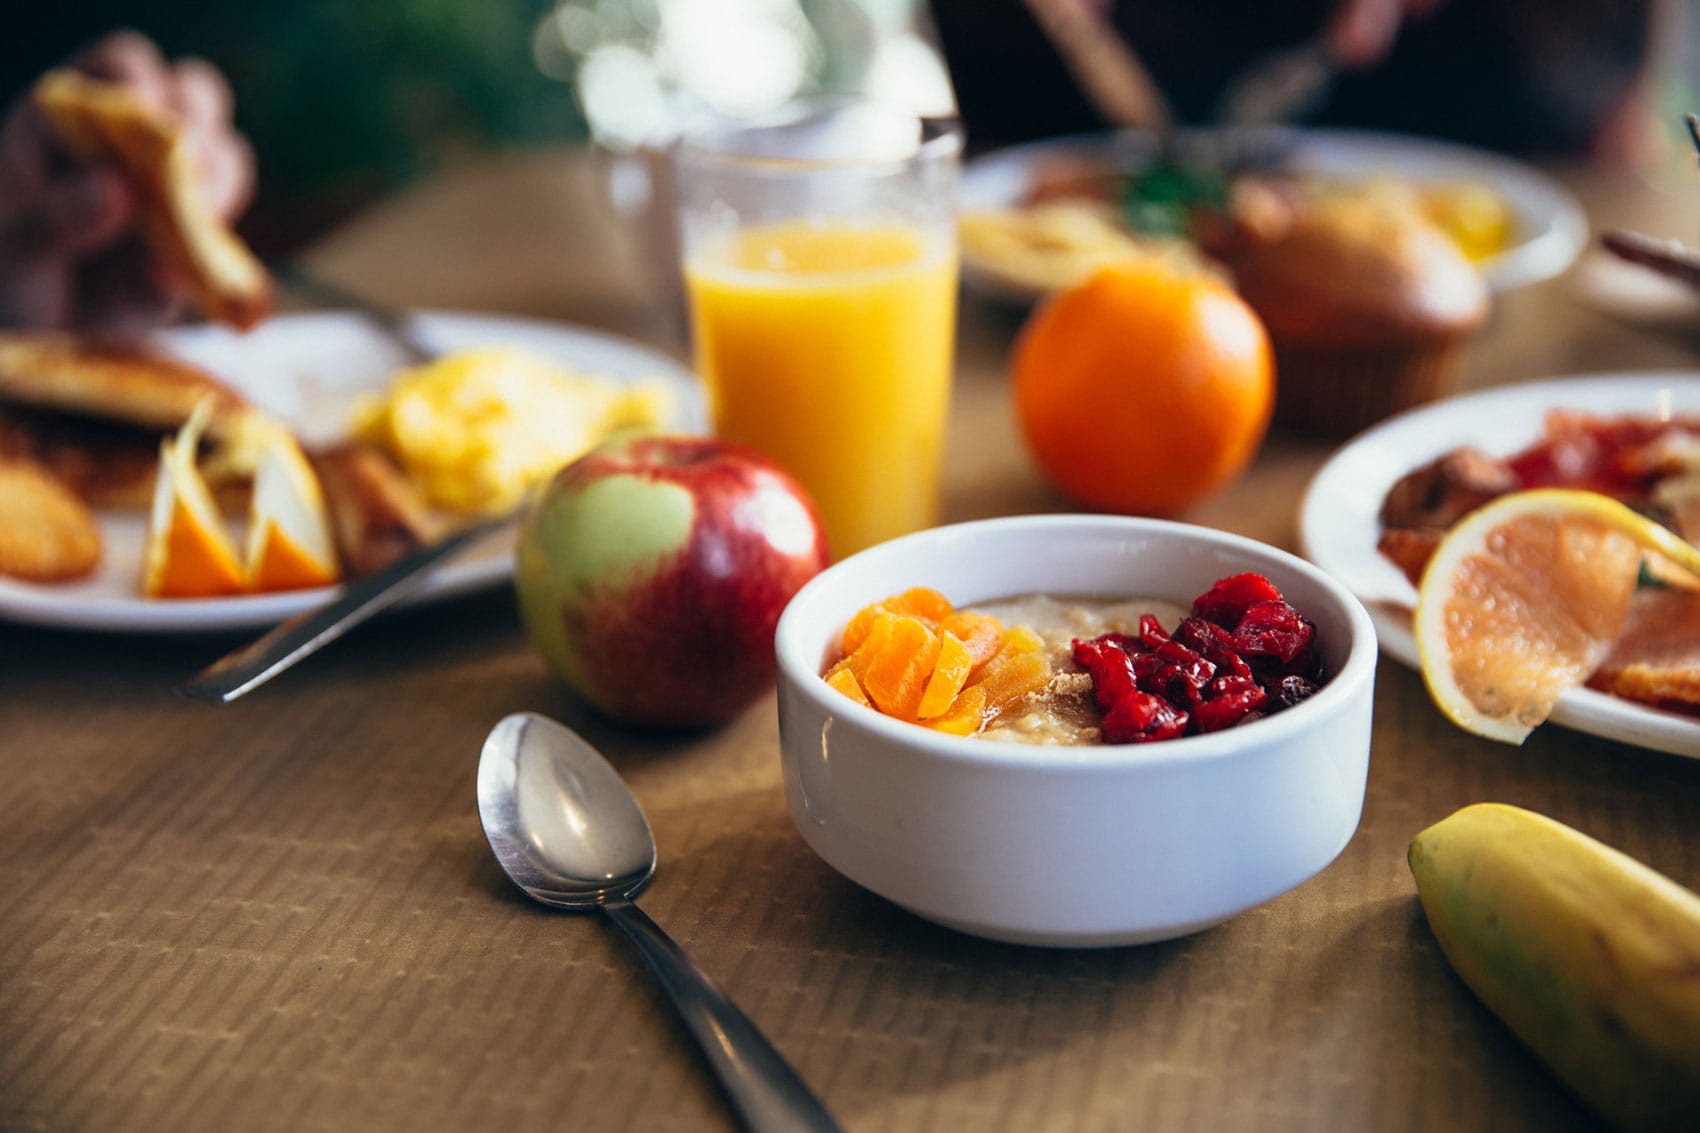 Image of breakfast food laid out on a table